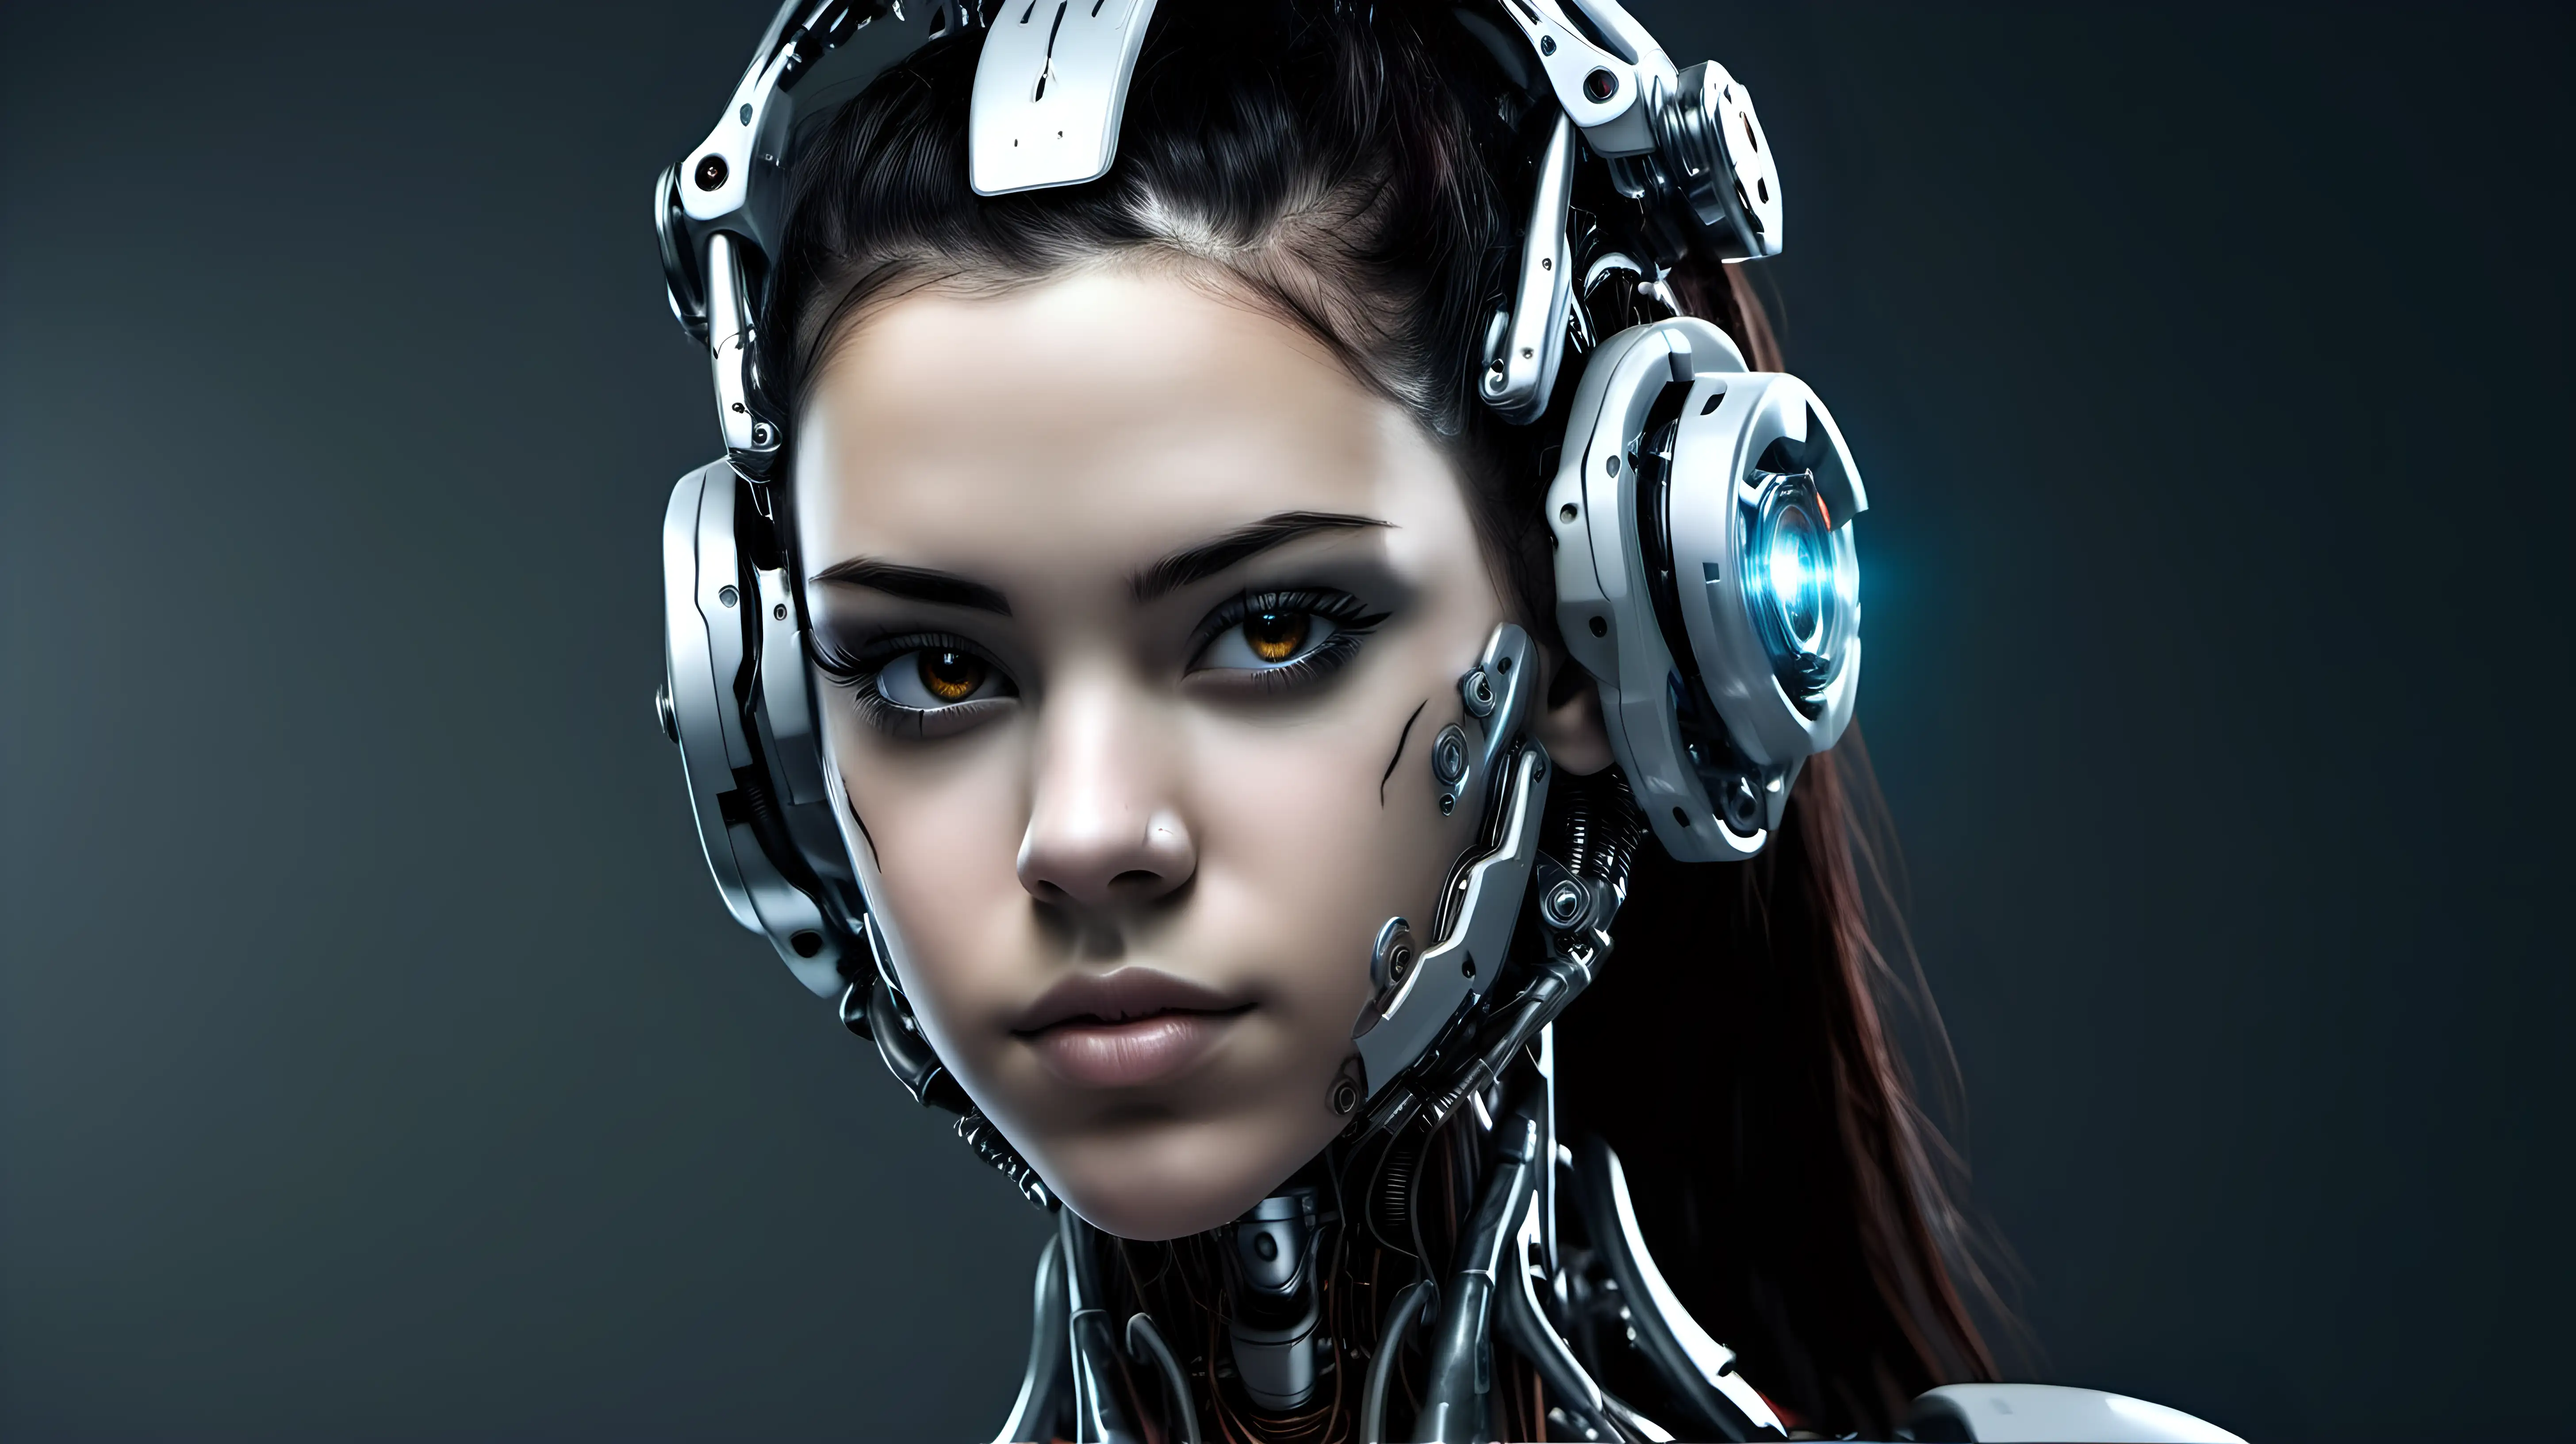 Cyborg woman, 18 years old. She has a cyborg face, but she is extremely beautiful. She has dark hair. She has beautiful ears.